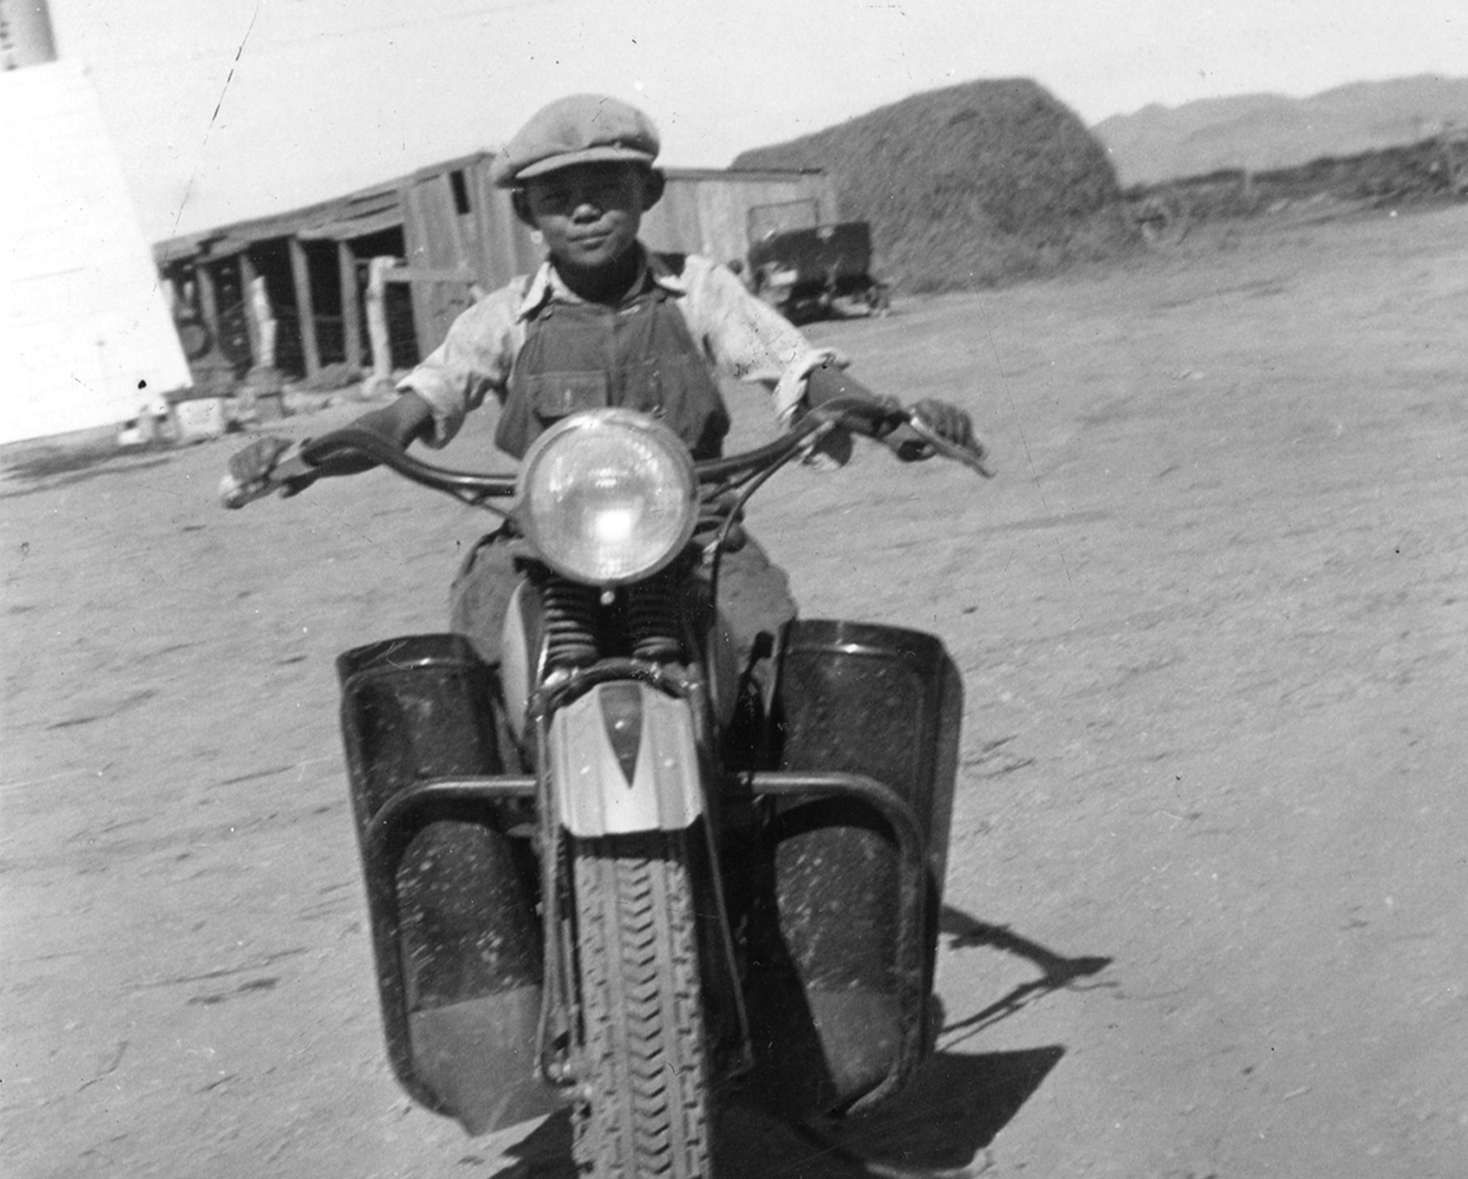 Roy as a young child on a bike